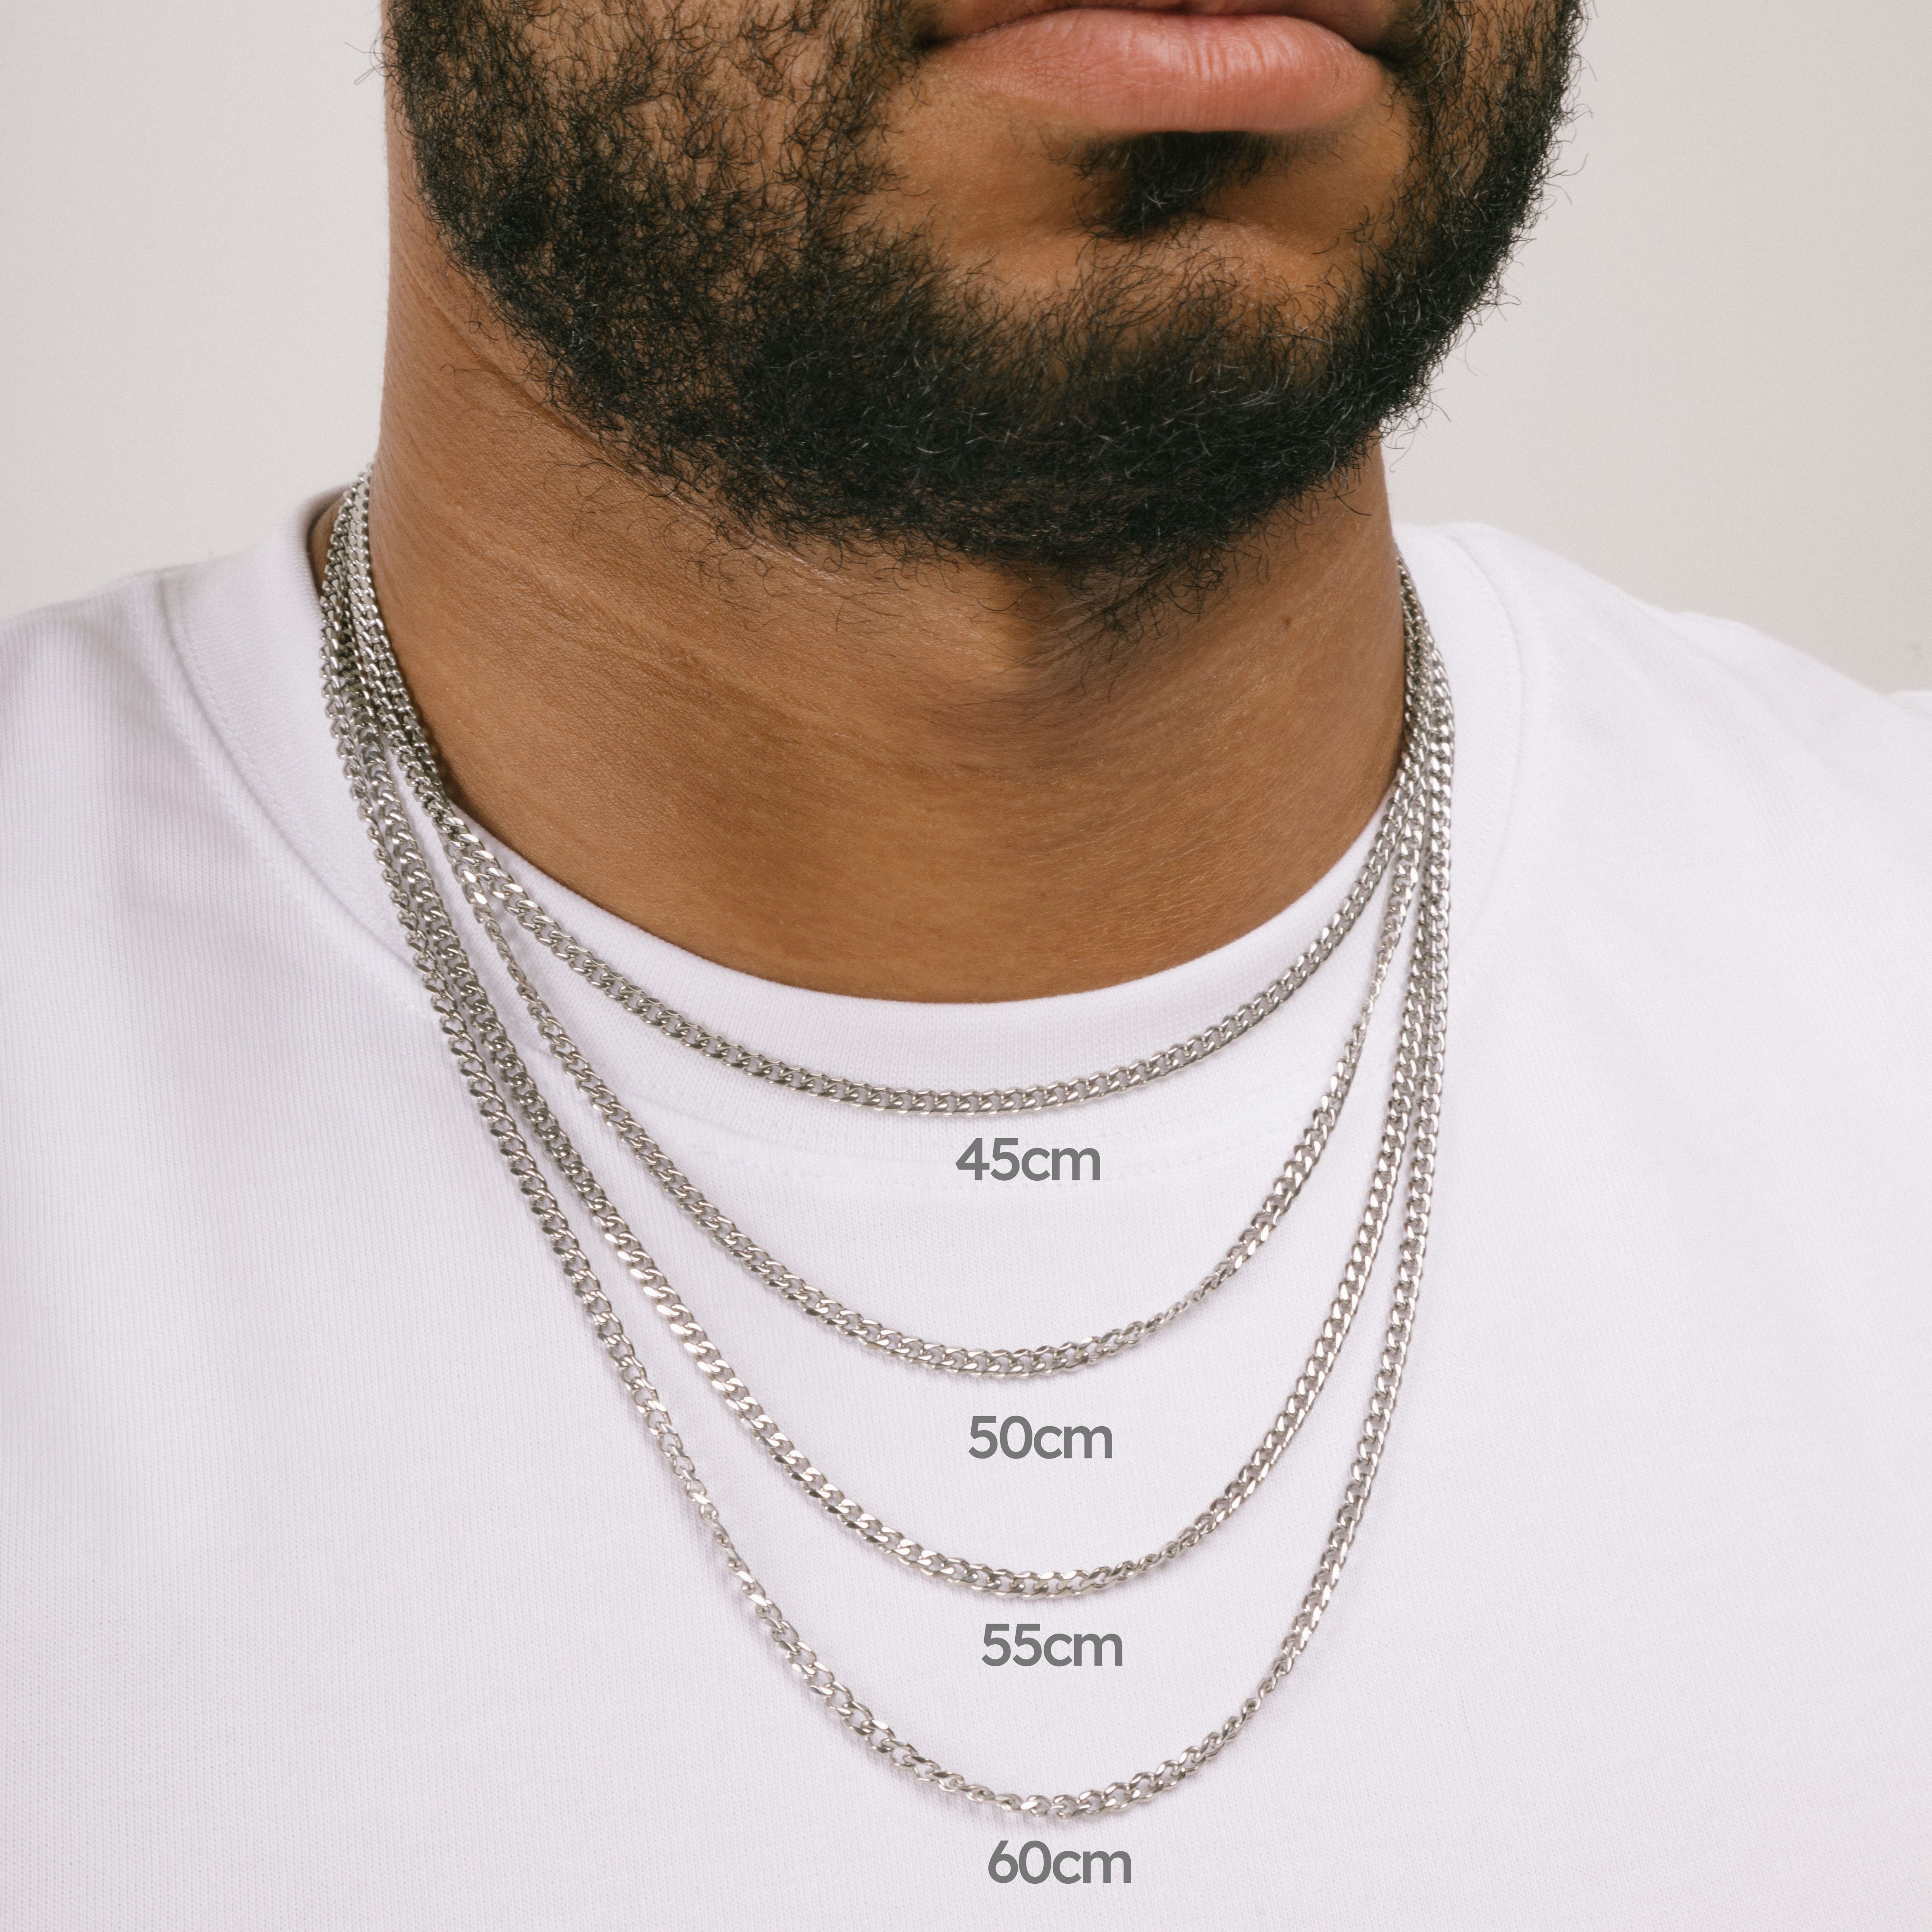    A model wearing the Cuban Chain in Silver is crafted from Stainless Steel material and is non-tarnish, water-resistant, and designed to be hypoallergenic.